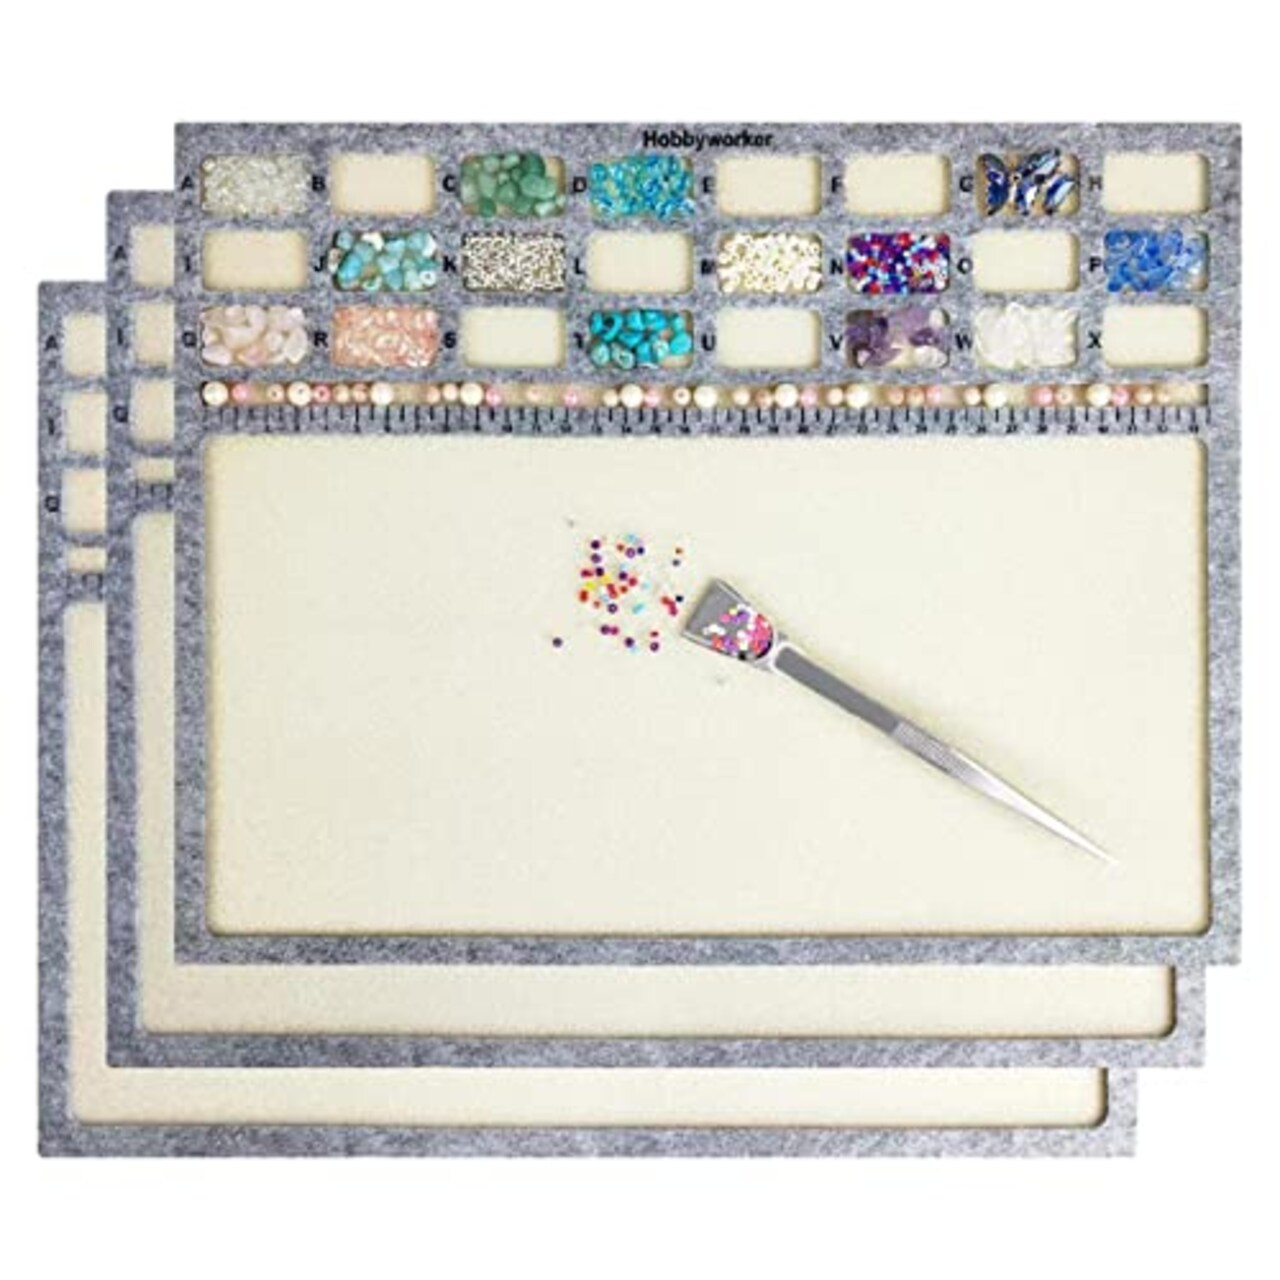 hobbyworker The Bead Mat,Soft Perfect Stable,Surface Flocking with